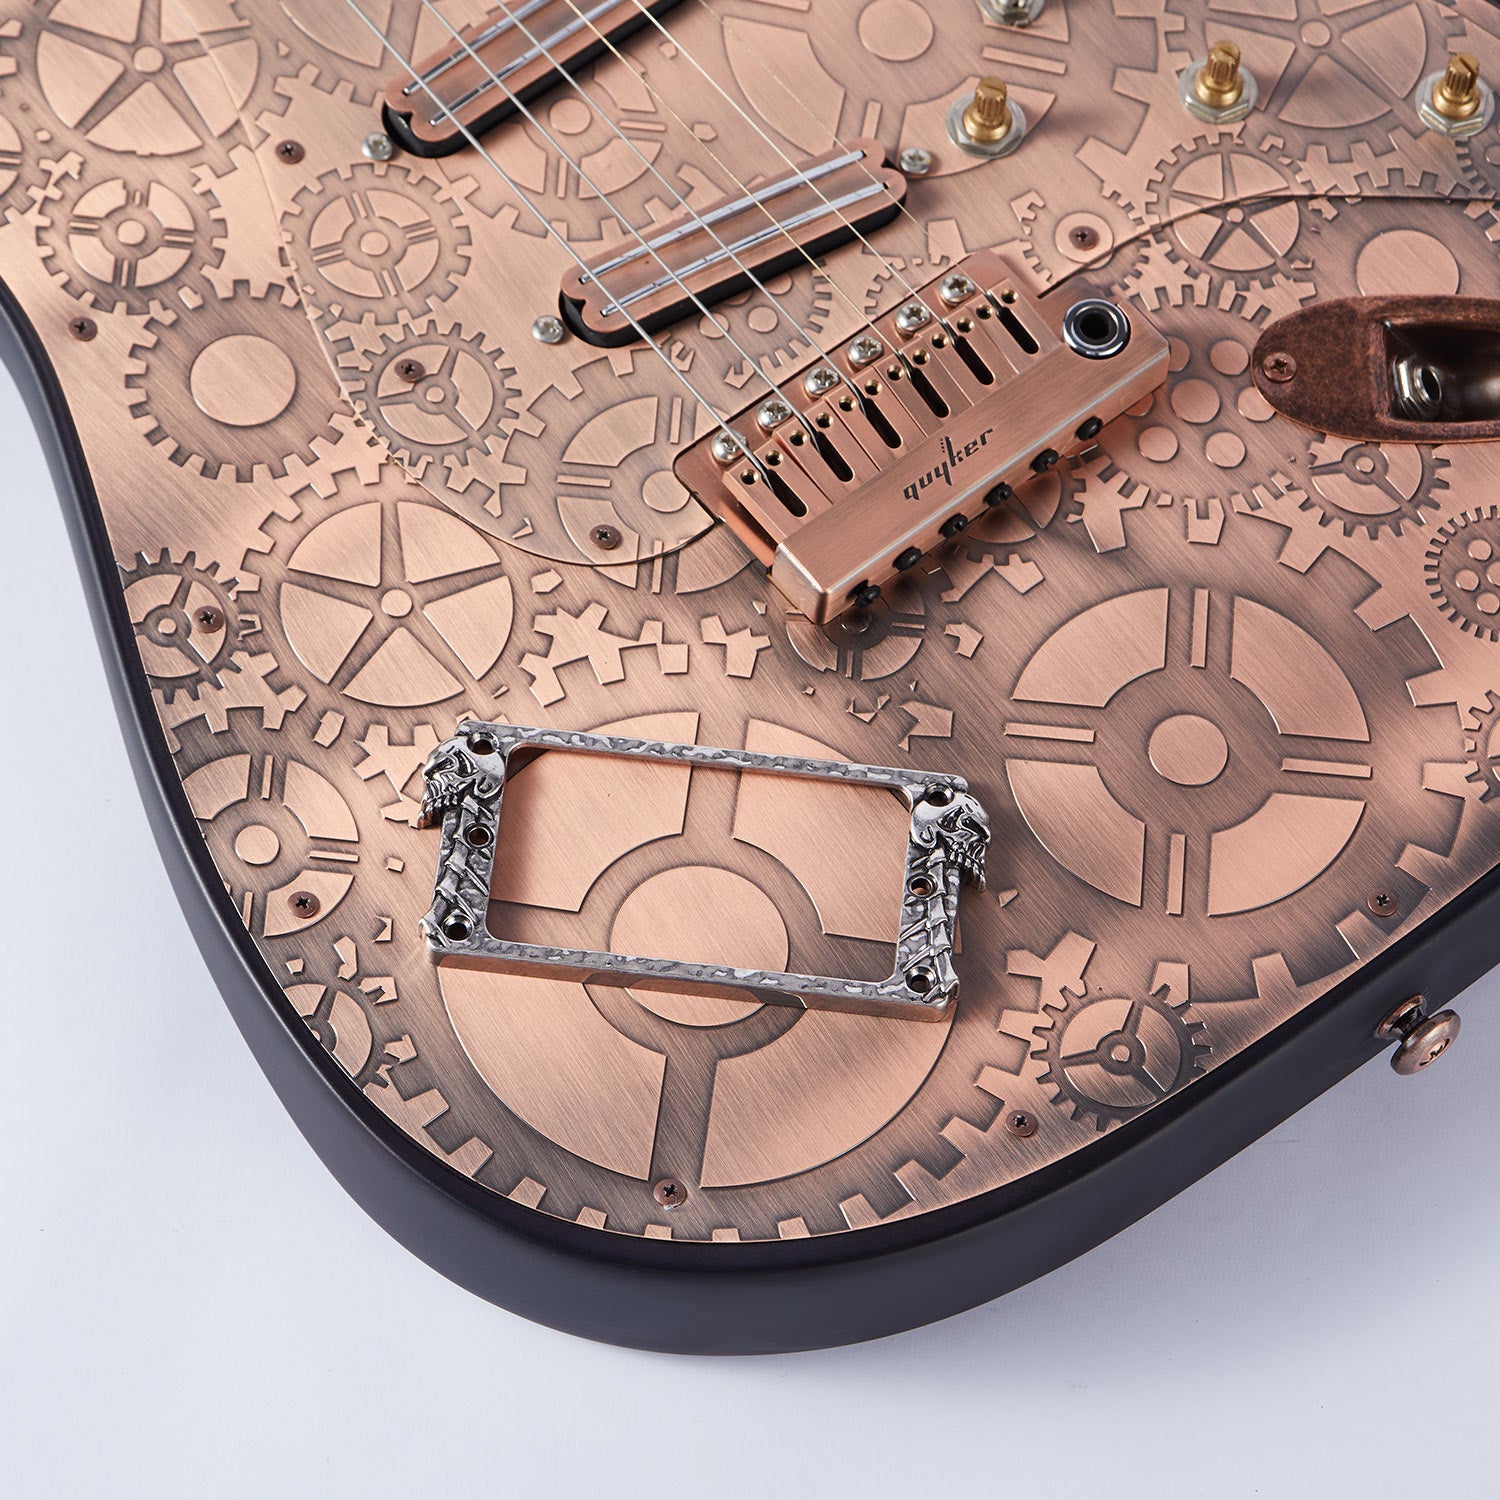 A versatile and durable pickup frame designed for electric guitars.